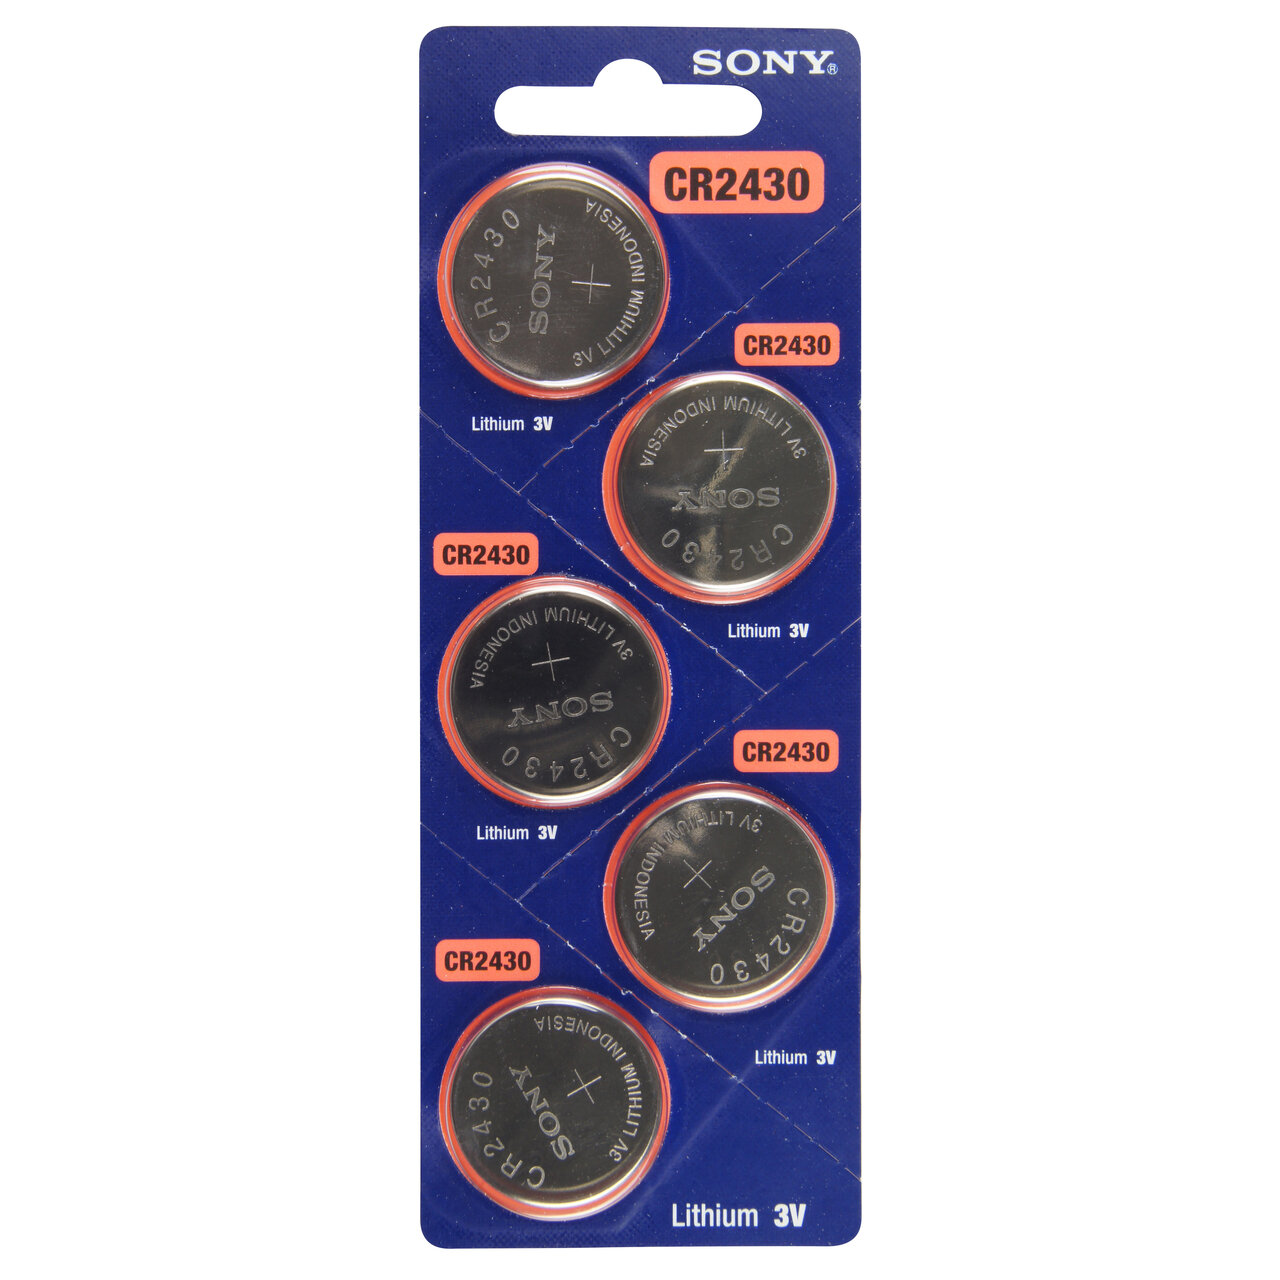 Type 2430 SONY Lithium Battery Tear Strip Pack of 5 SWB2430